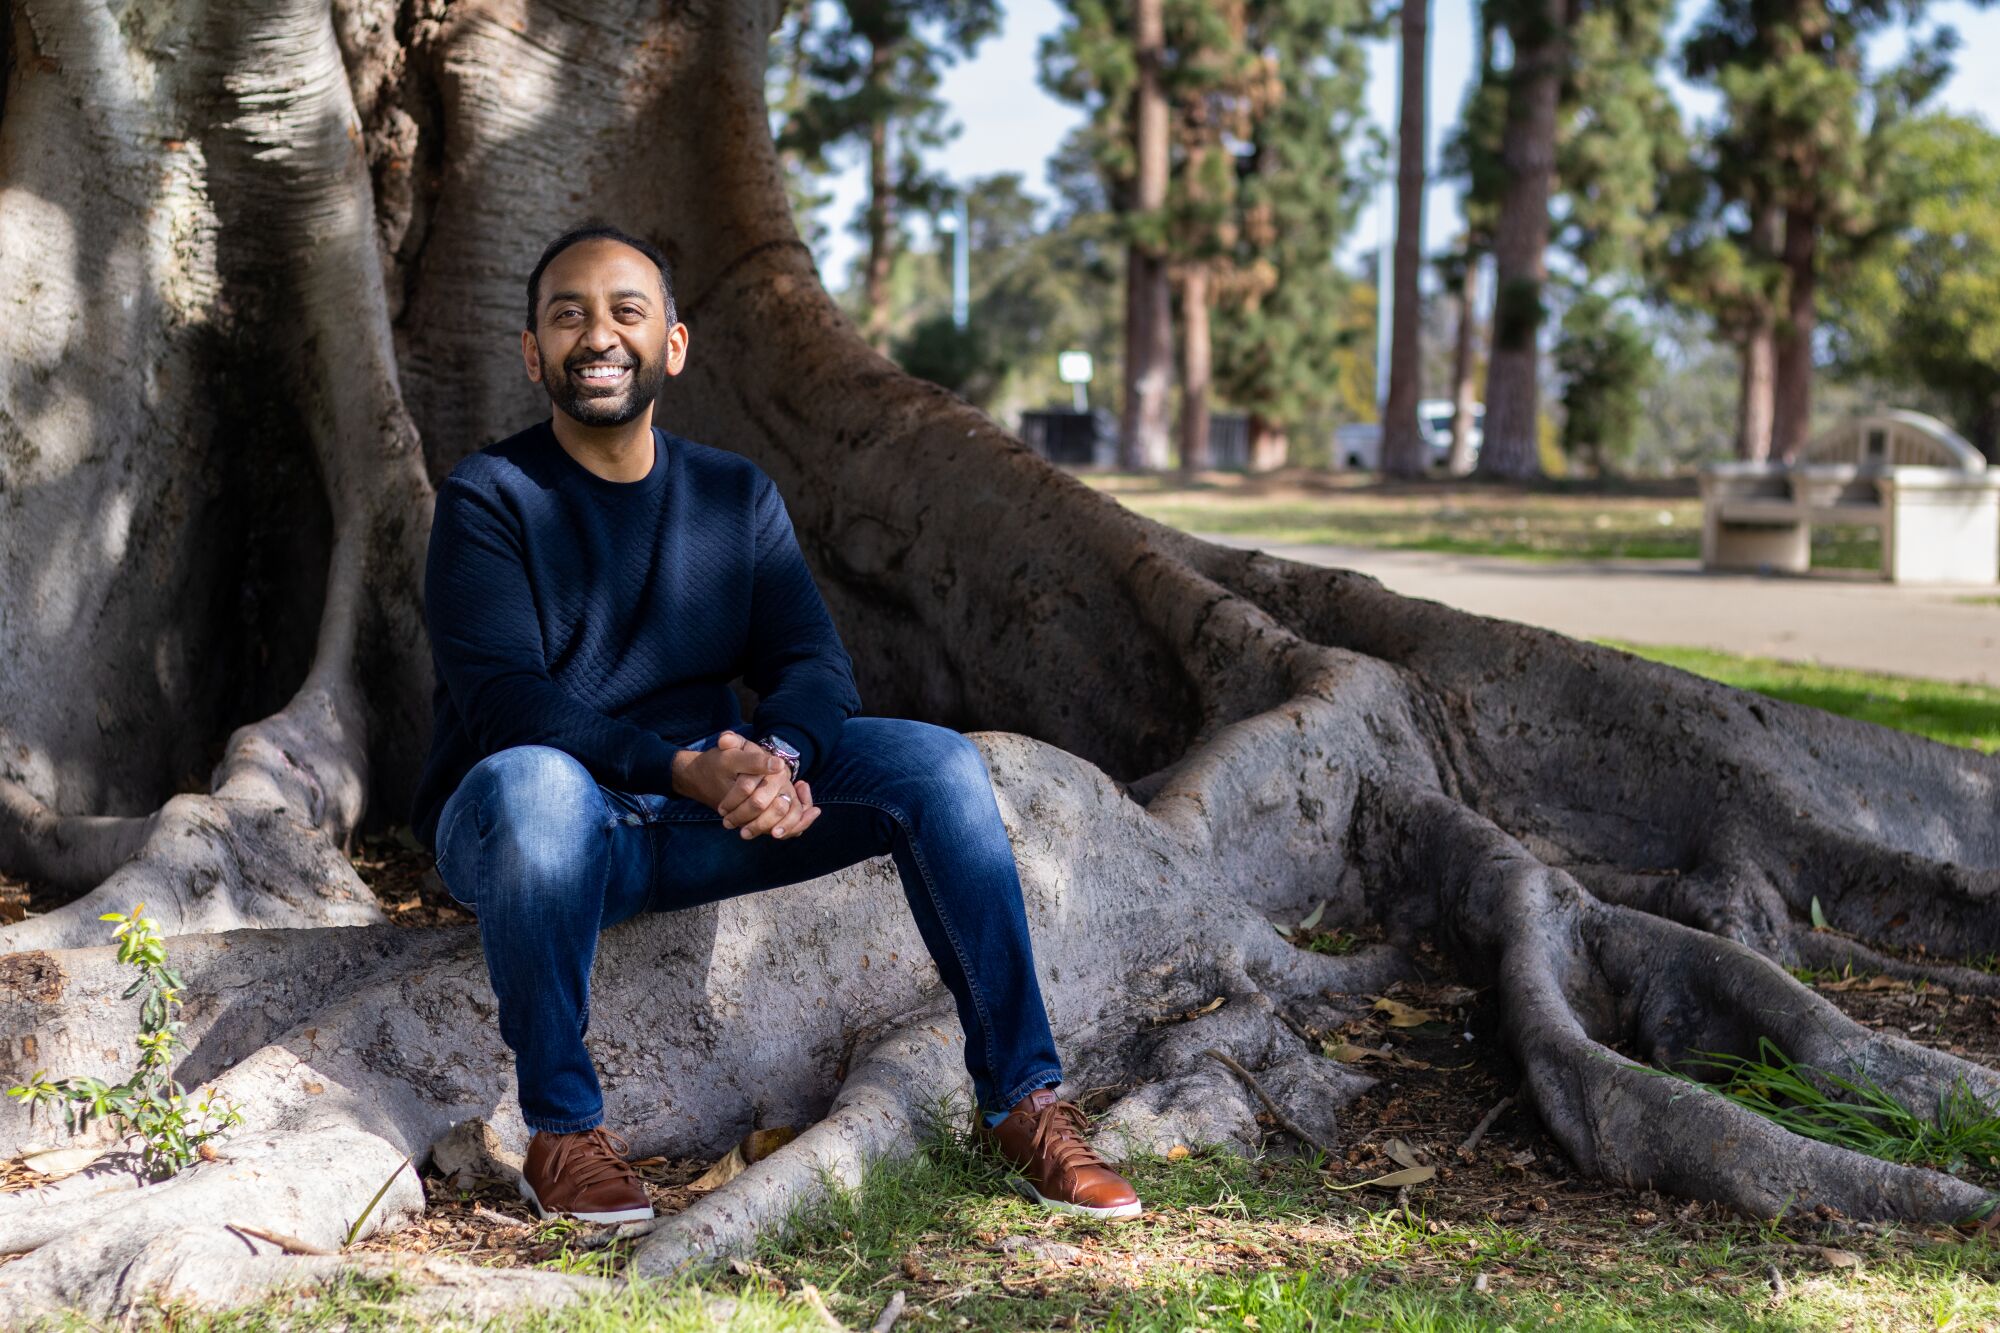 Sameer Patel photographed in Balboa Park sitting on the roots of a large banyan tree.